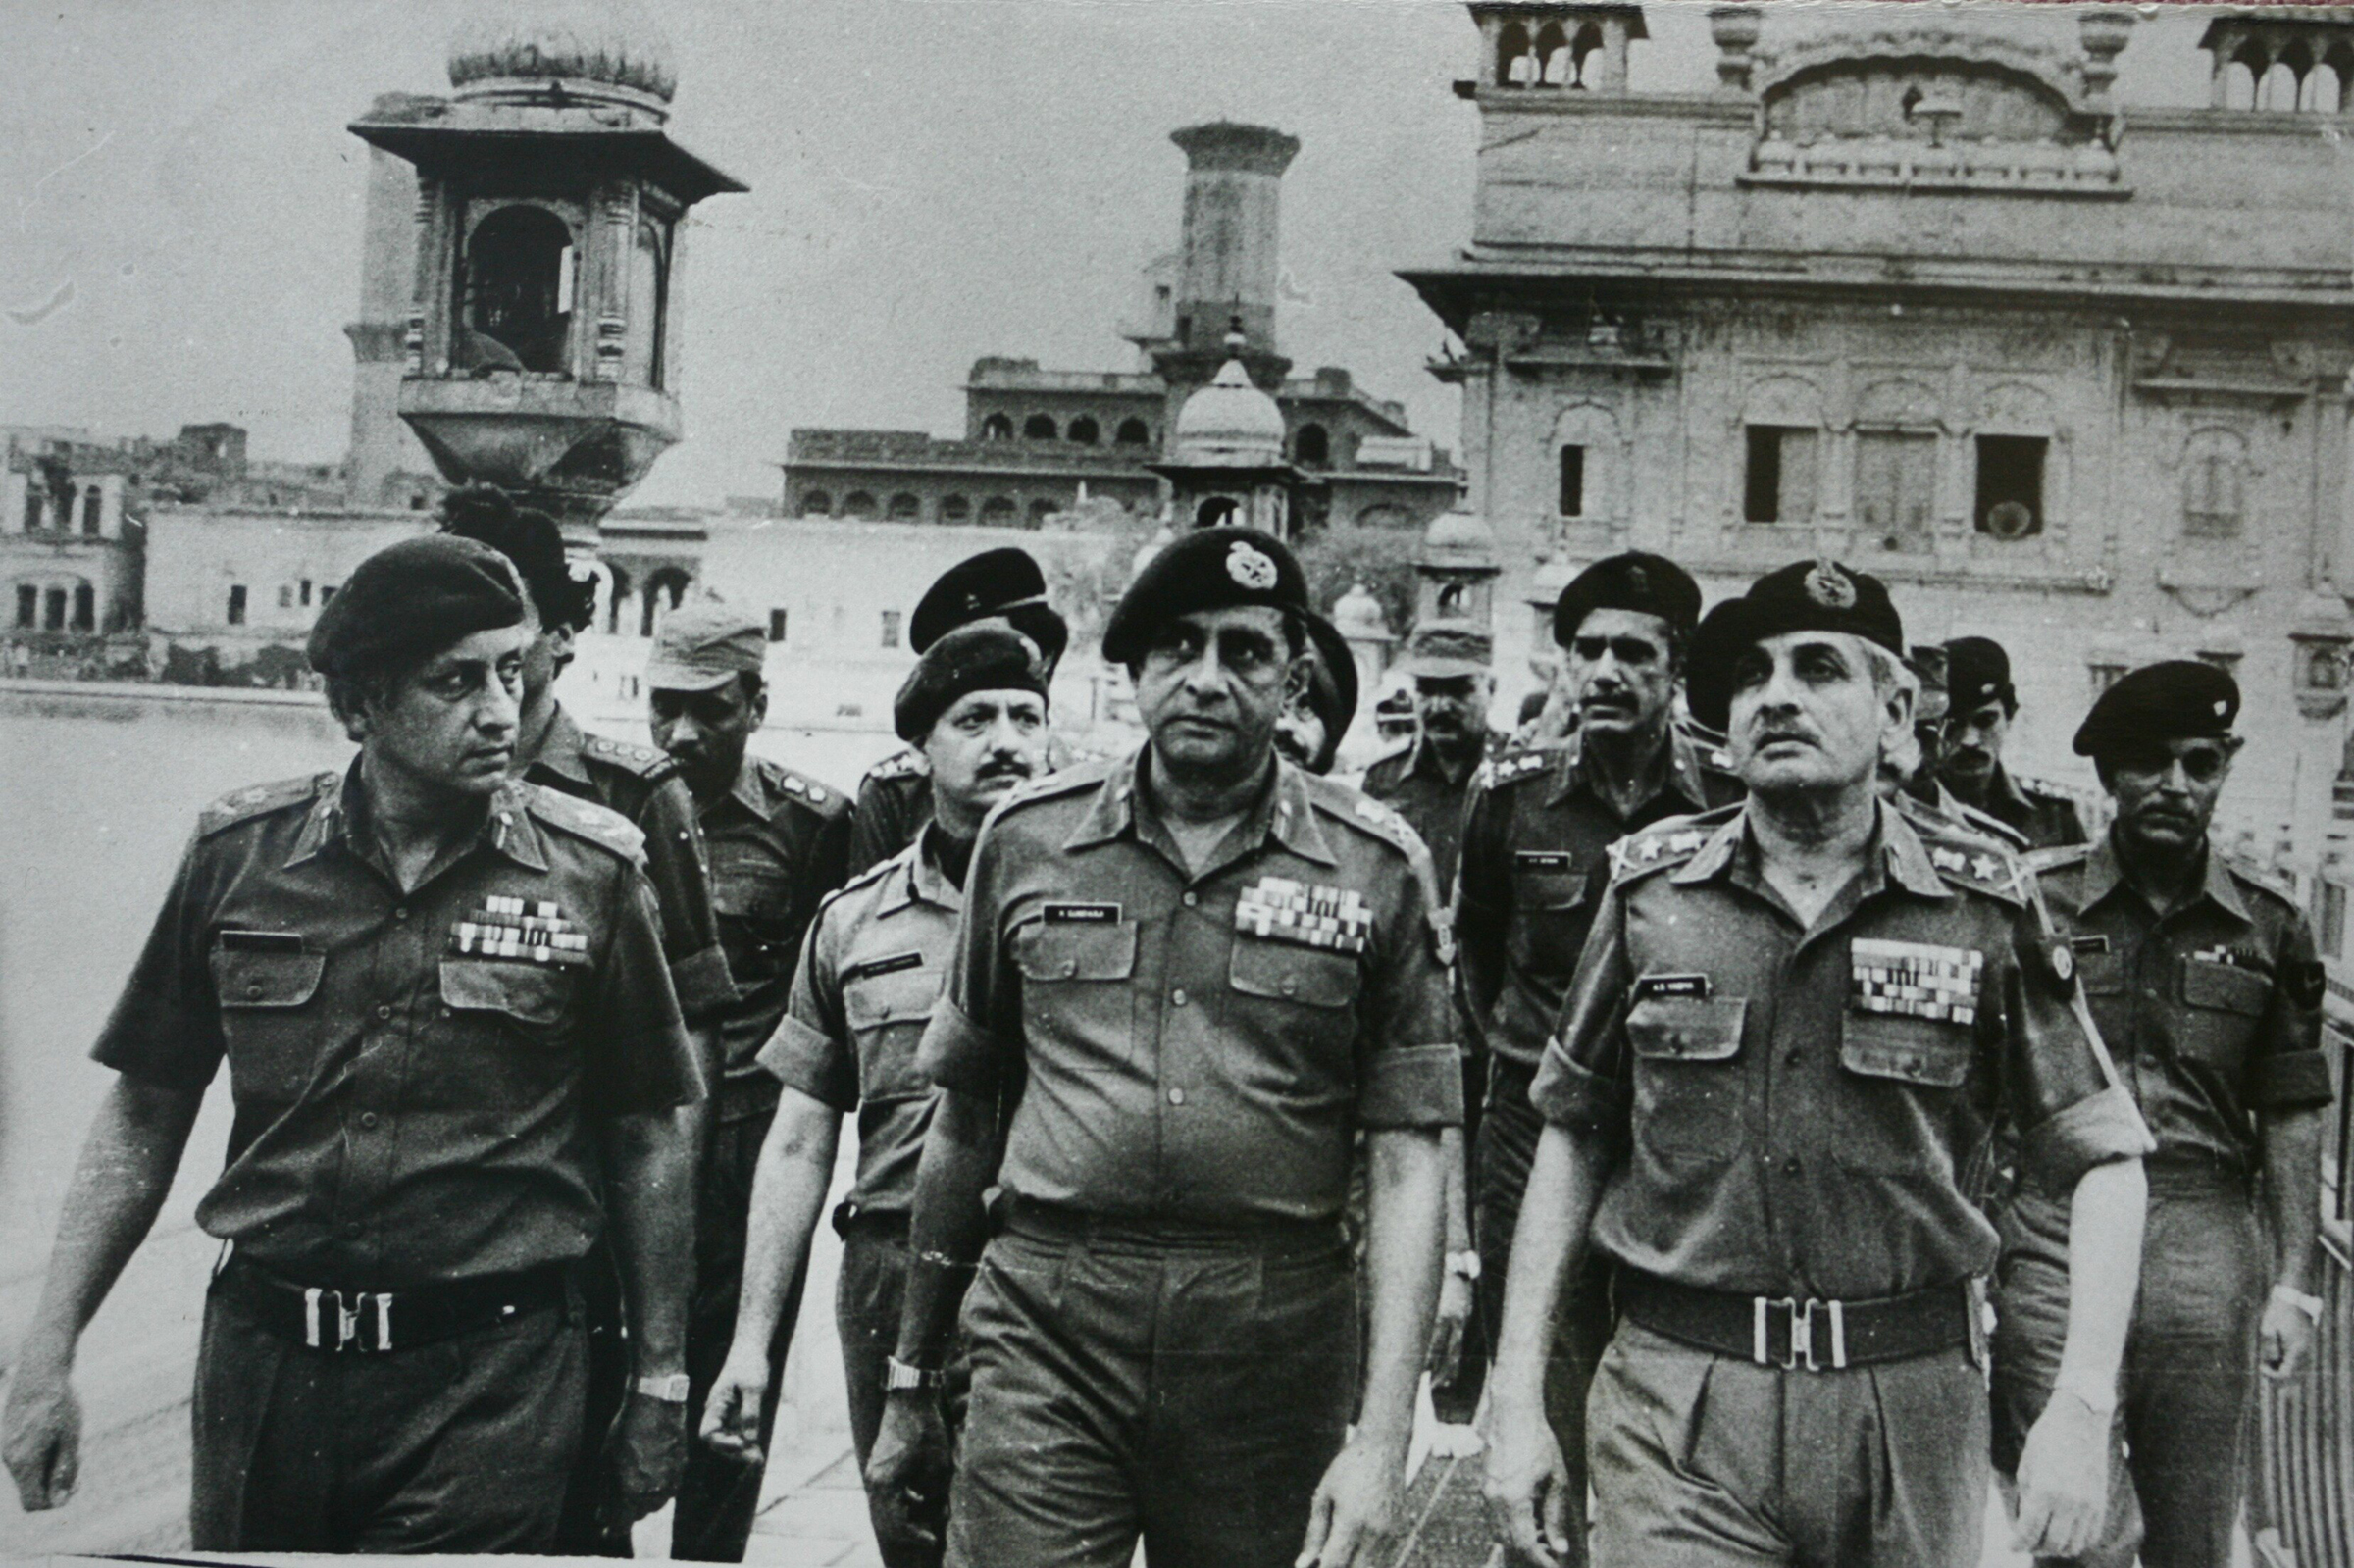 Senior army officers at the site of a military operation ordered by Then-Prime Minister Indira Gandhi, to remove Sikh separatists in the Golden Temple in Amritsar, India, in 1984. (The India Today Group/Getty Images)